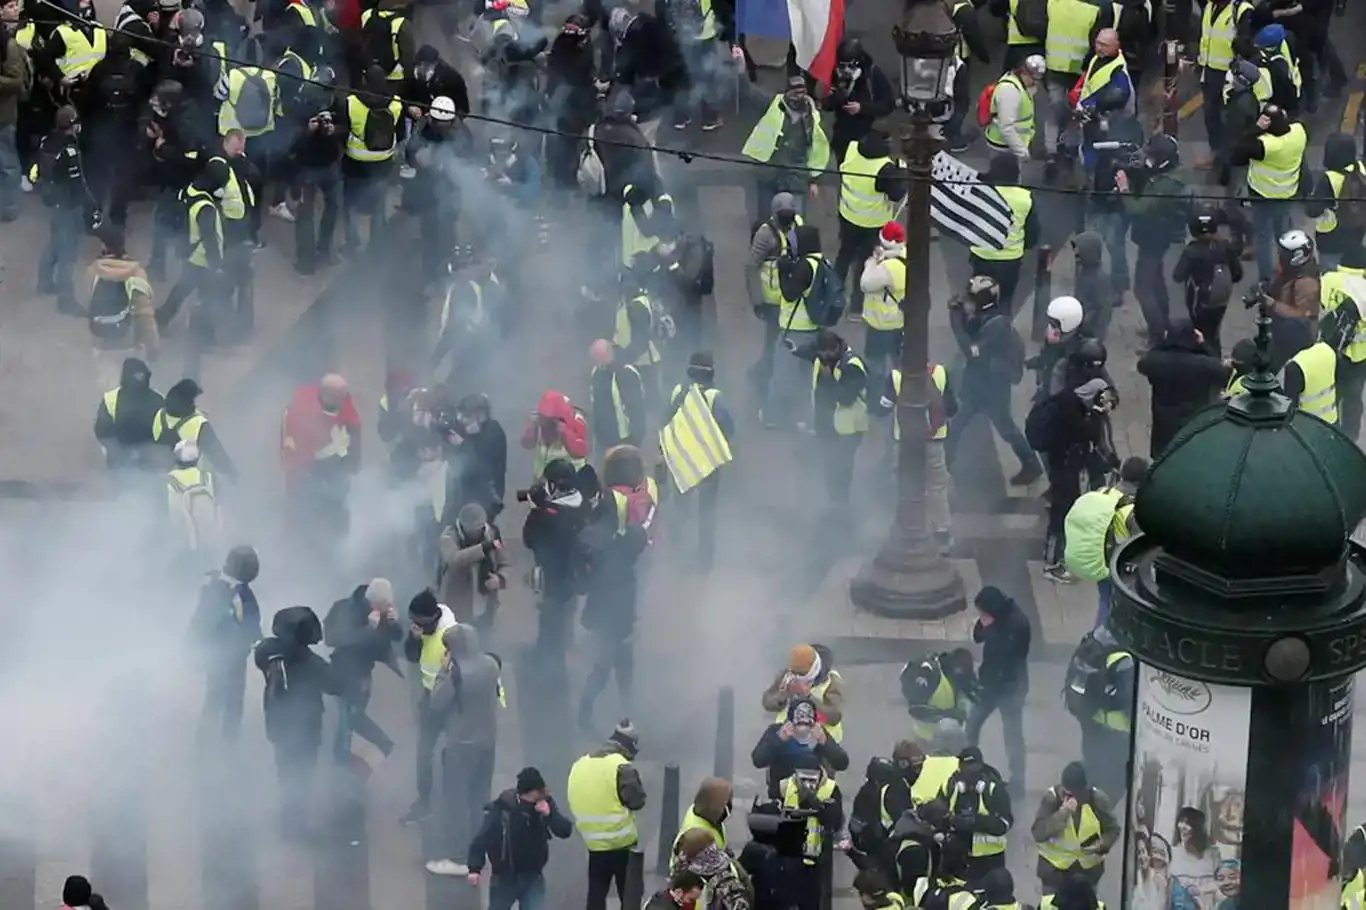 More than 500 arrested in anti-government protests across France